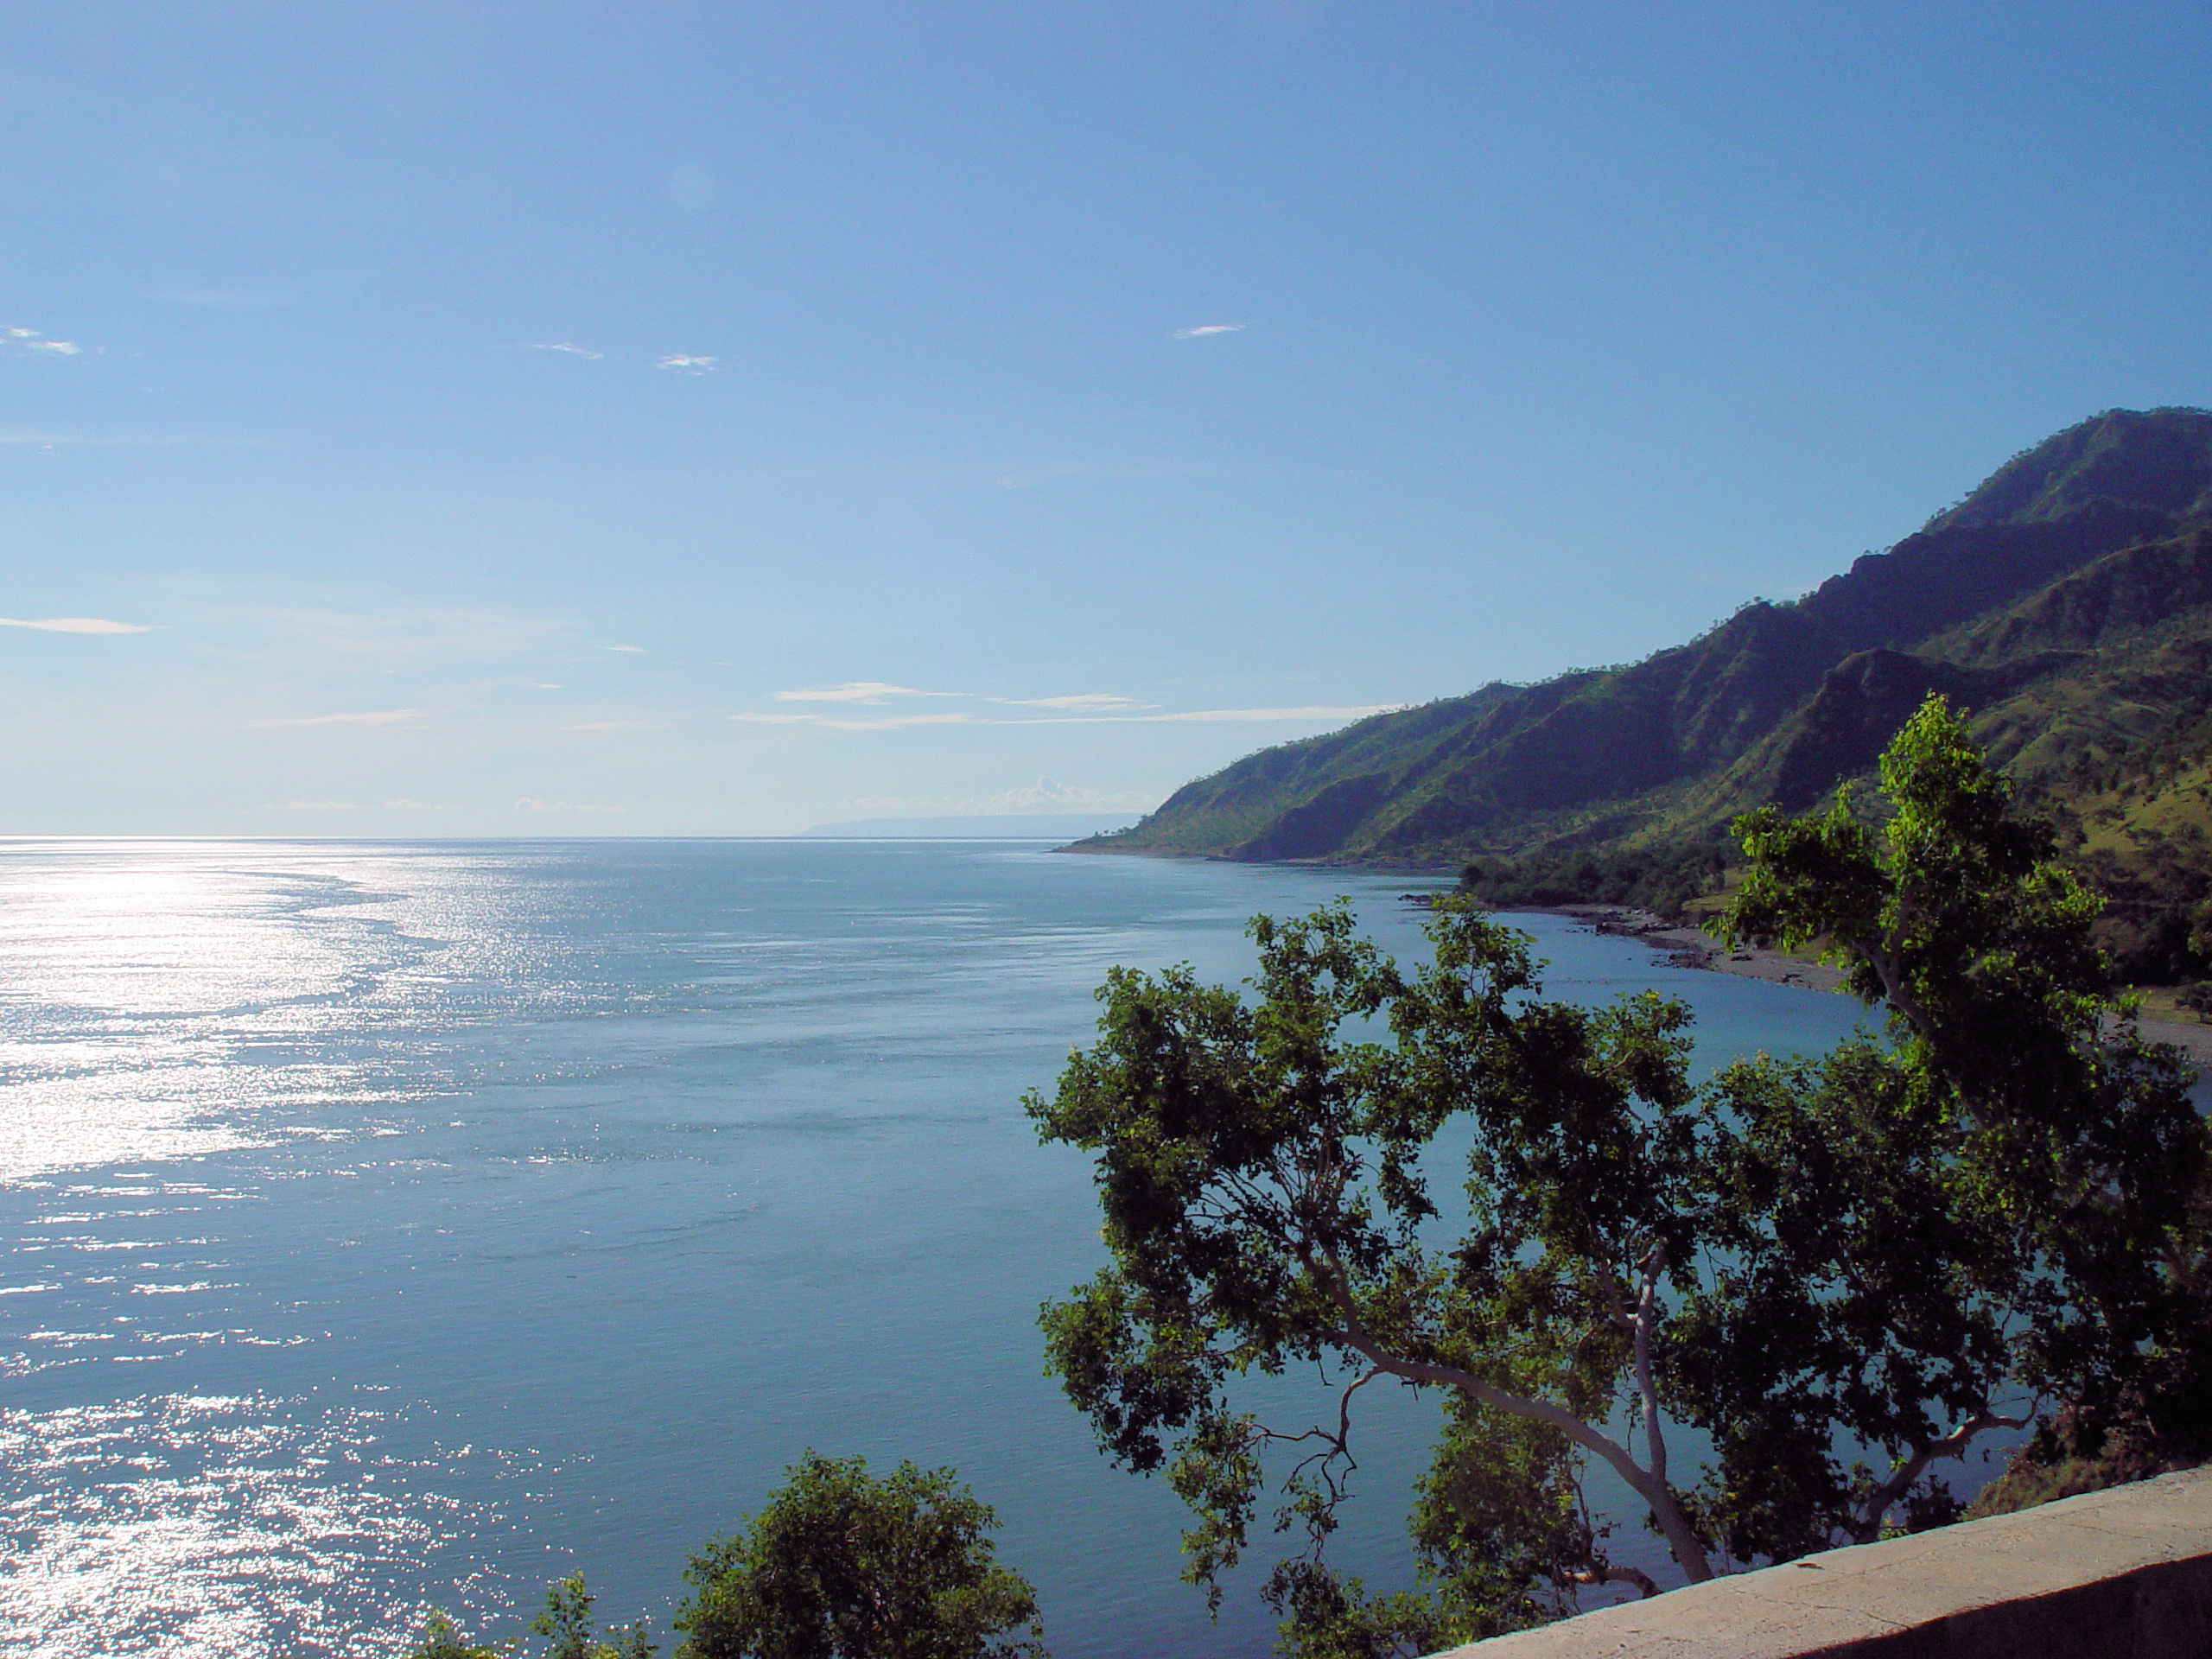 The Places of East Timor - Coastline view east of Dili